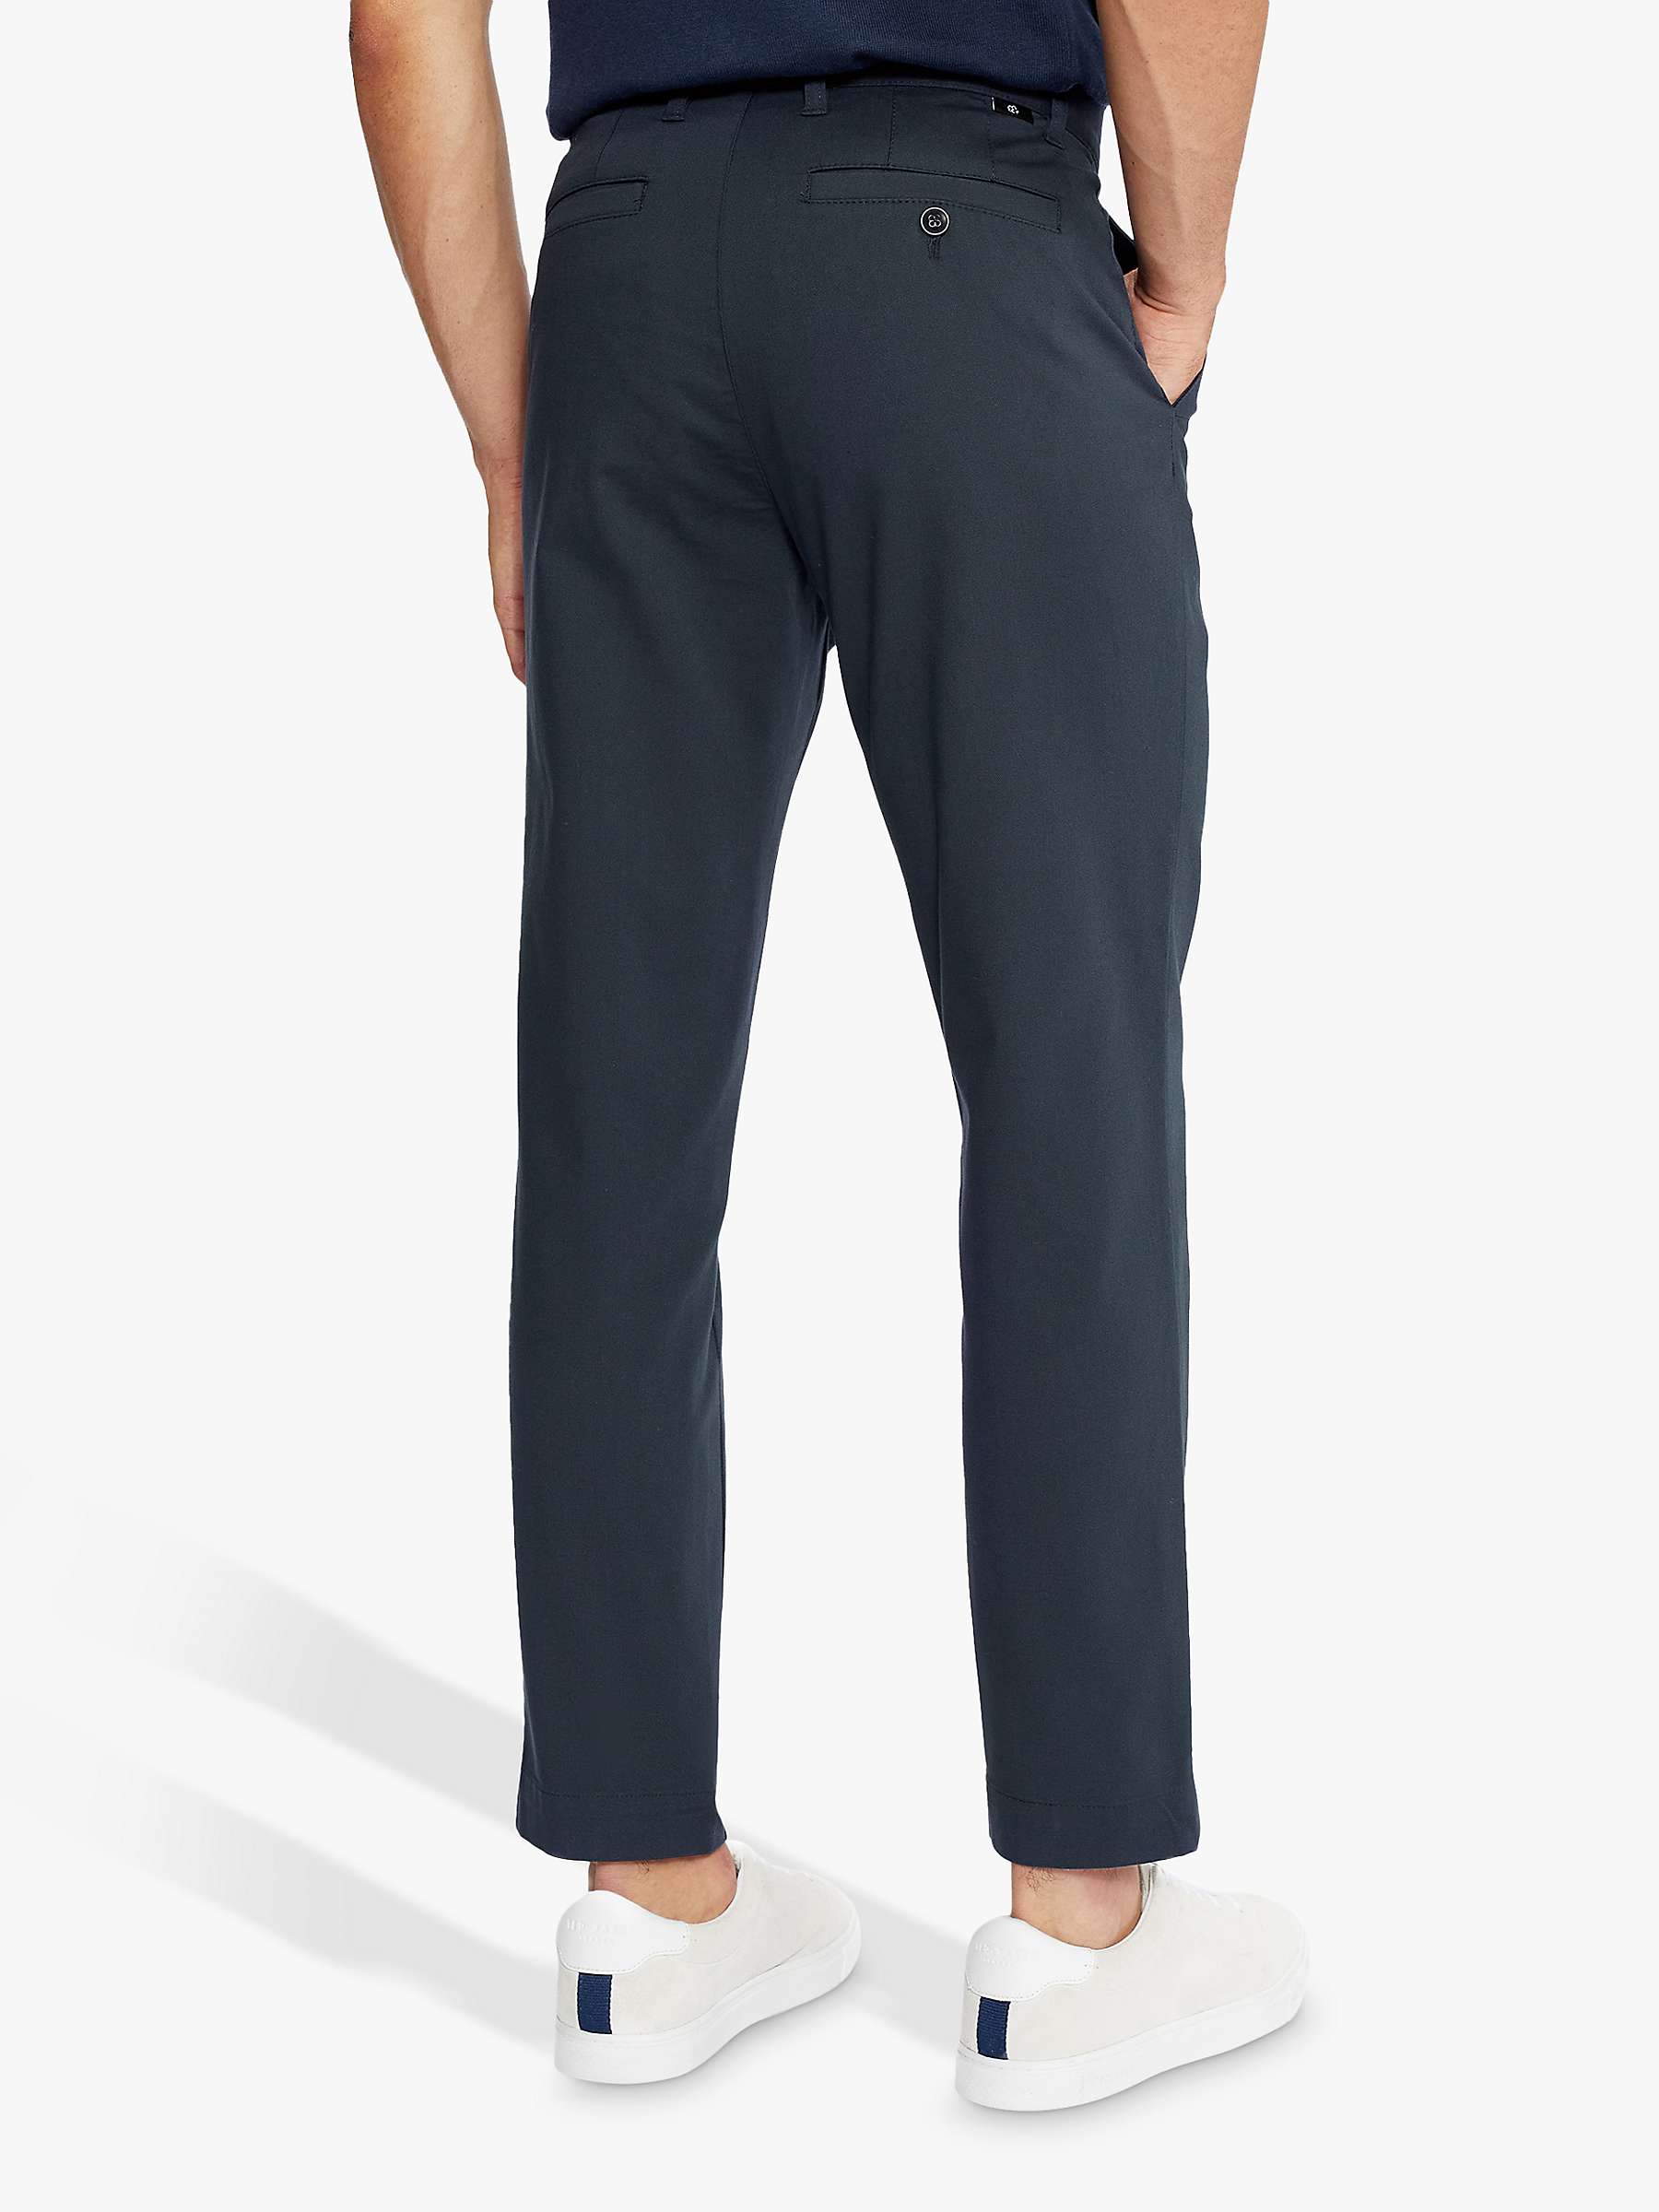 Buy Ted Baker Genbee Casual Chino Trousers, Navy Online at johnlewis.com